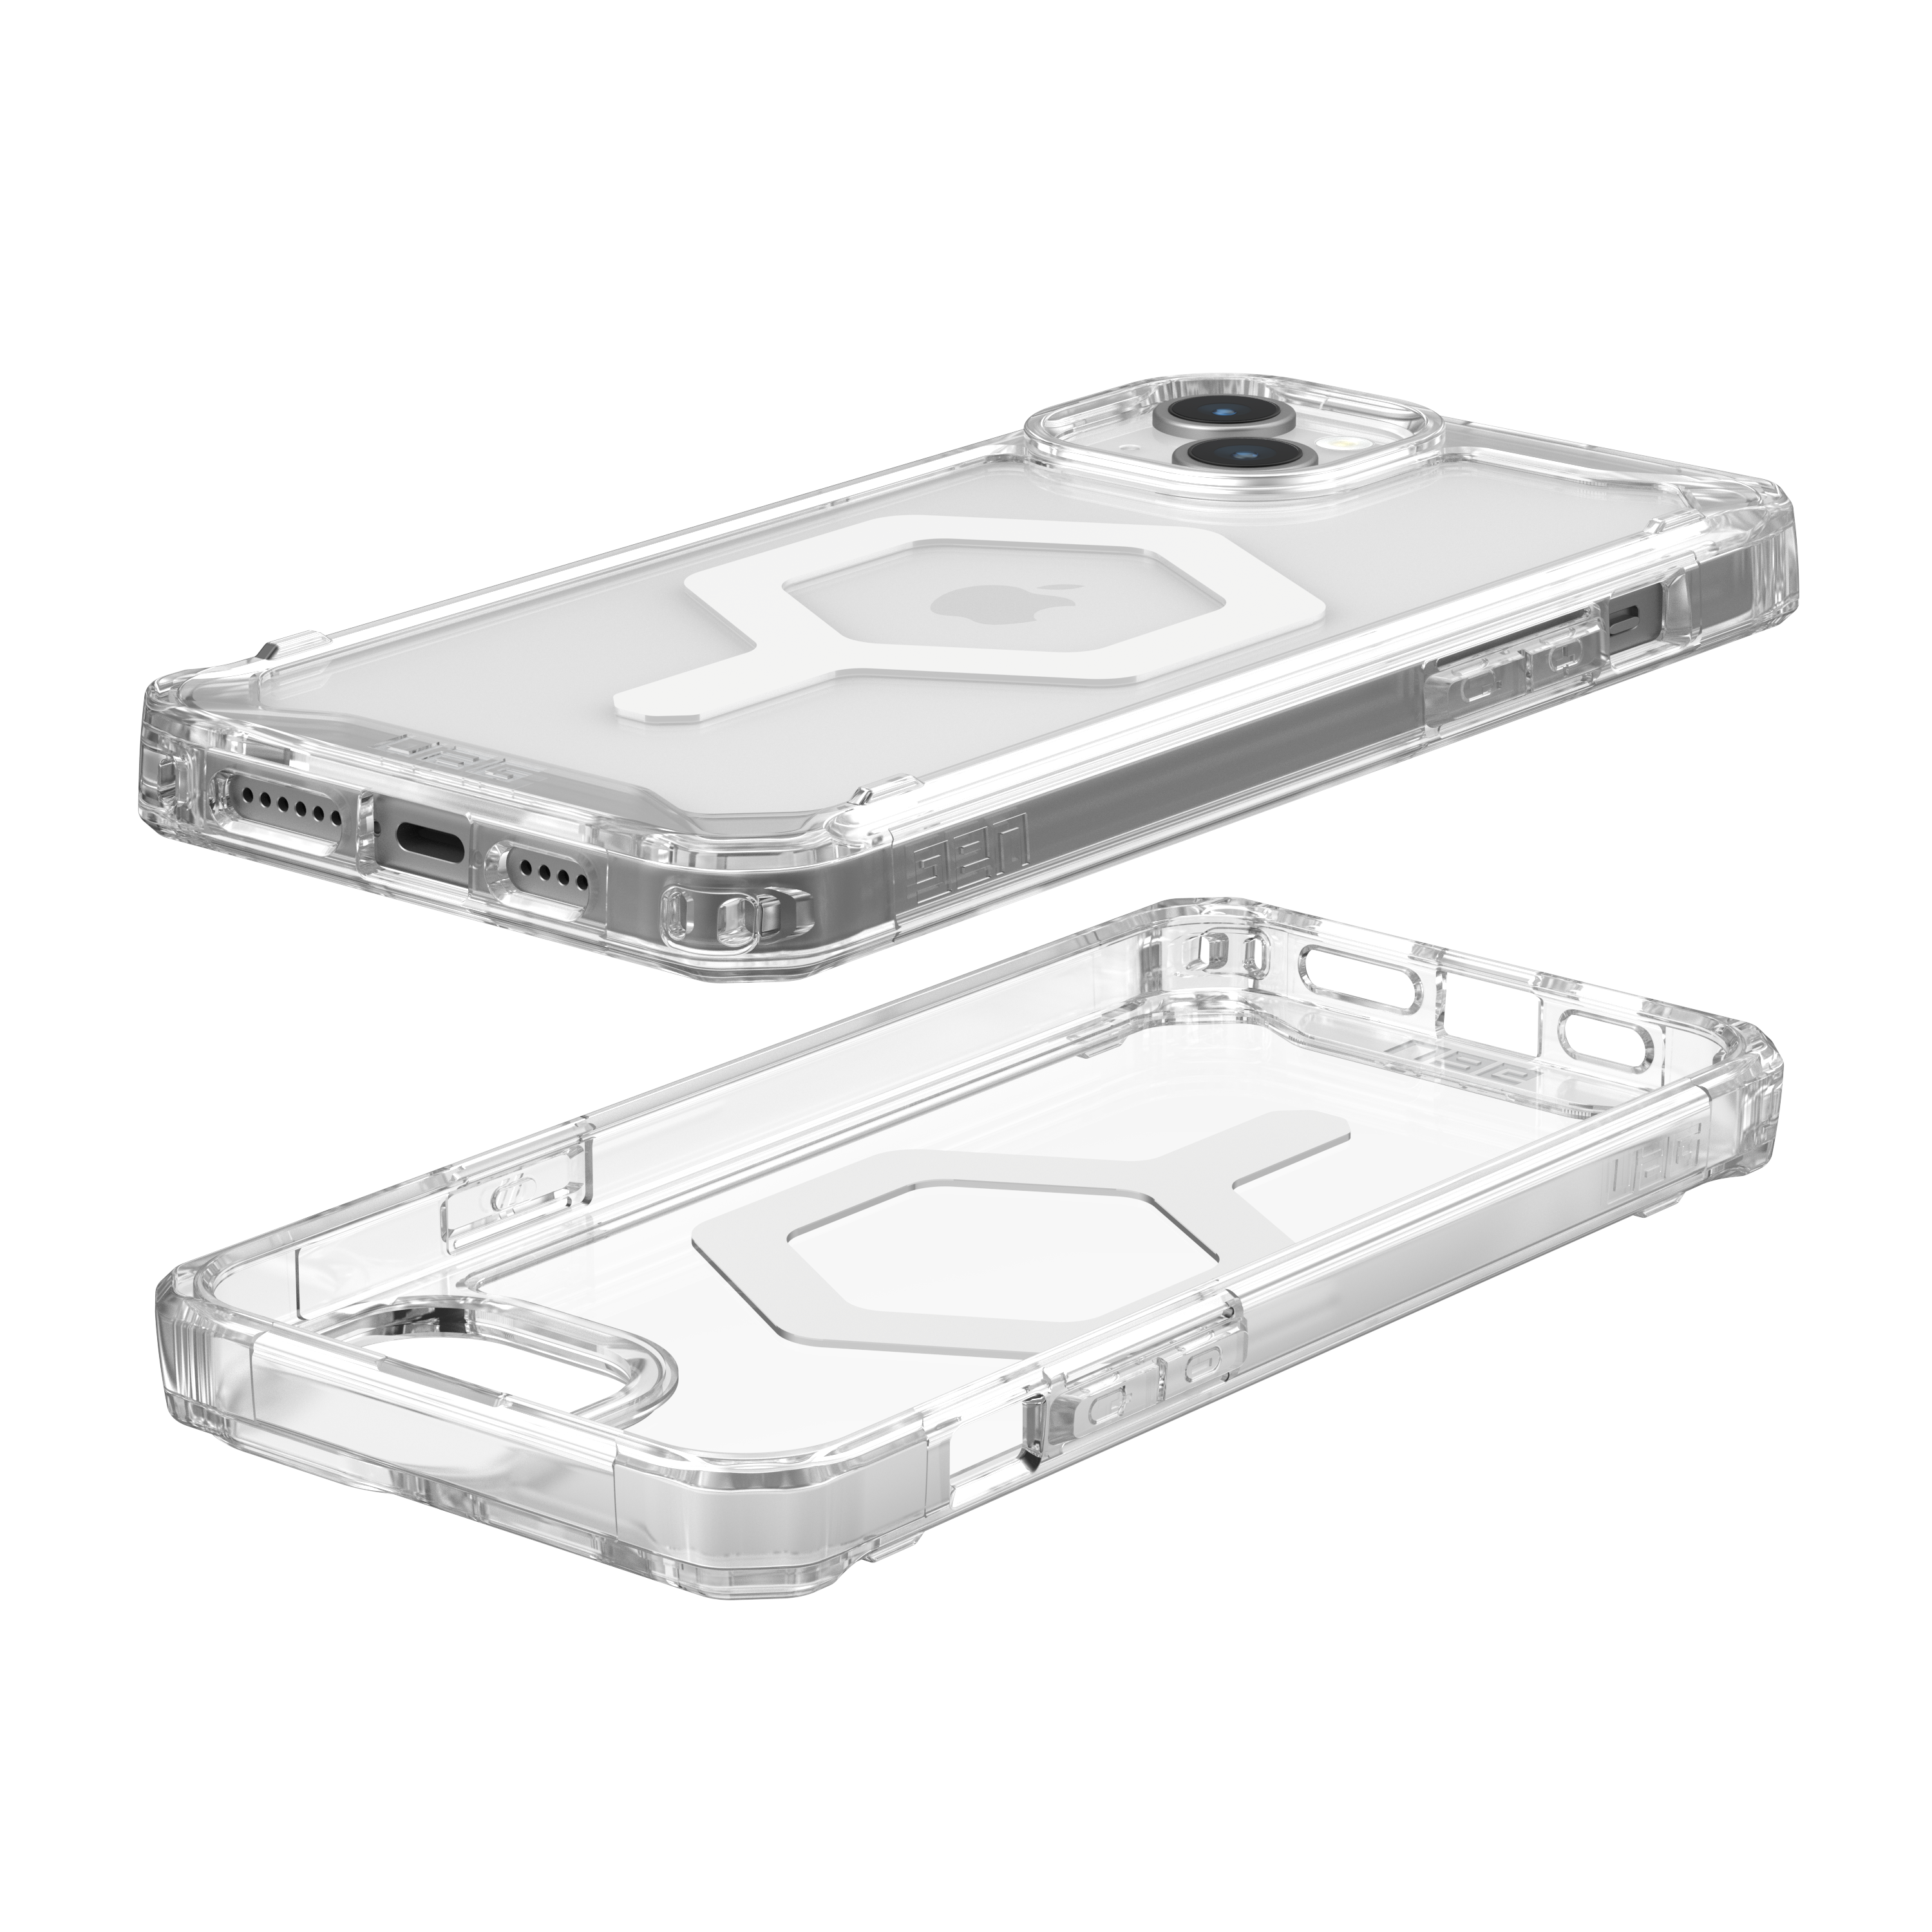 URBAN ARMOR GEAR Plyo (transparent)/weiß 15 ice iPhone Backcover, Apple, Plus, MagSafe